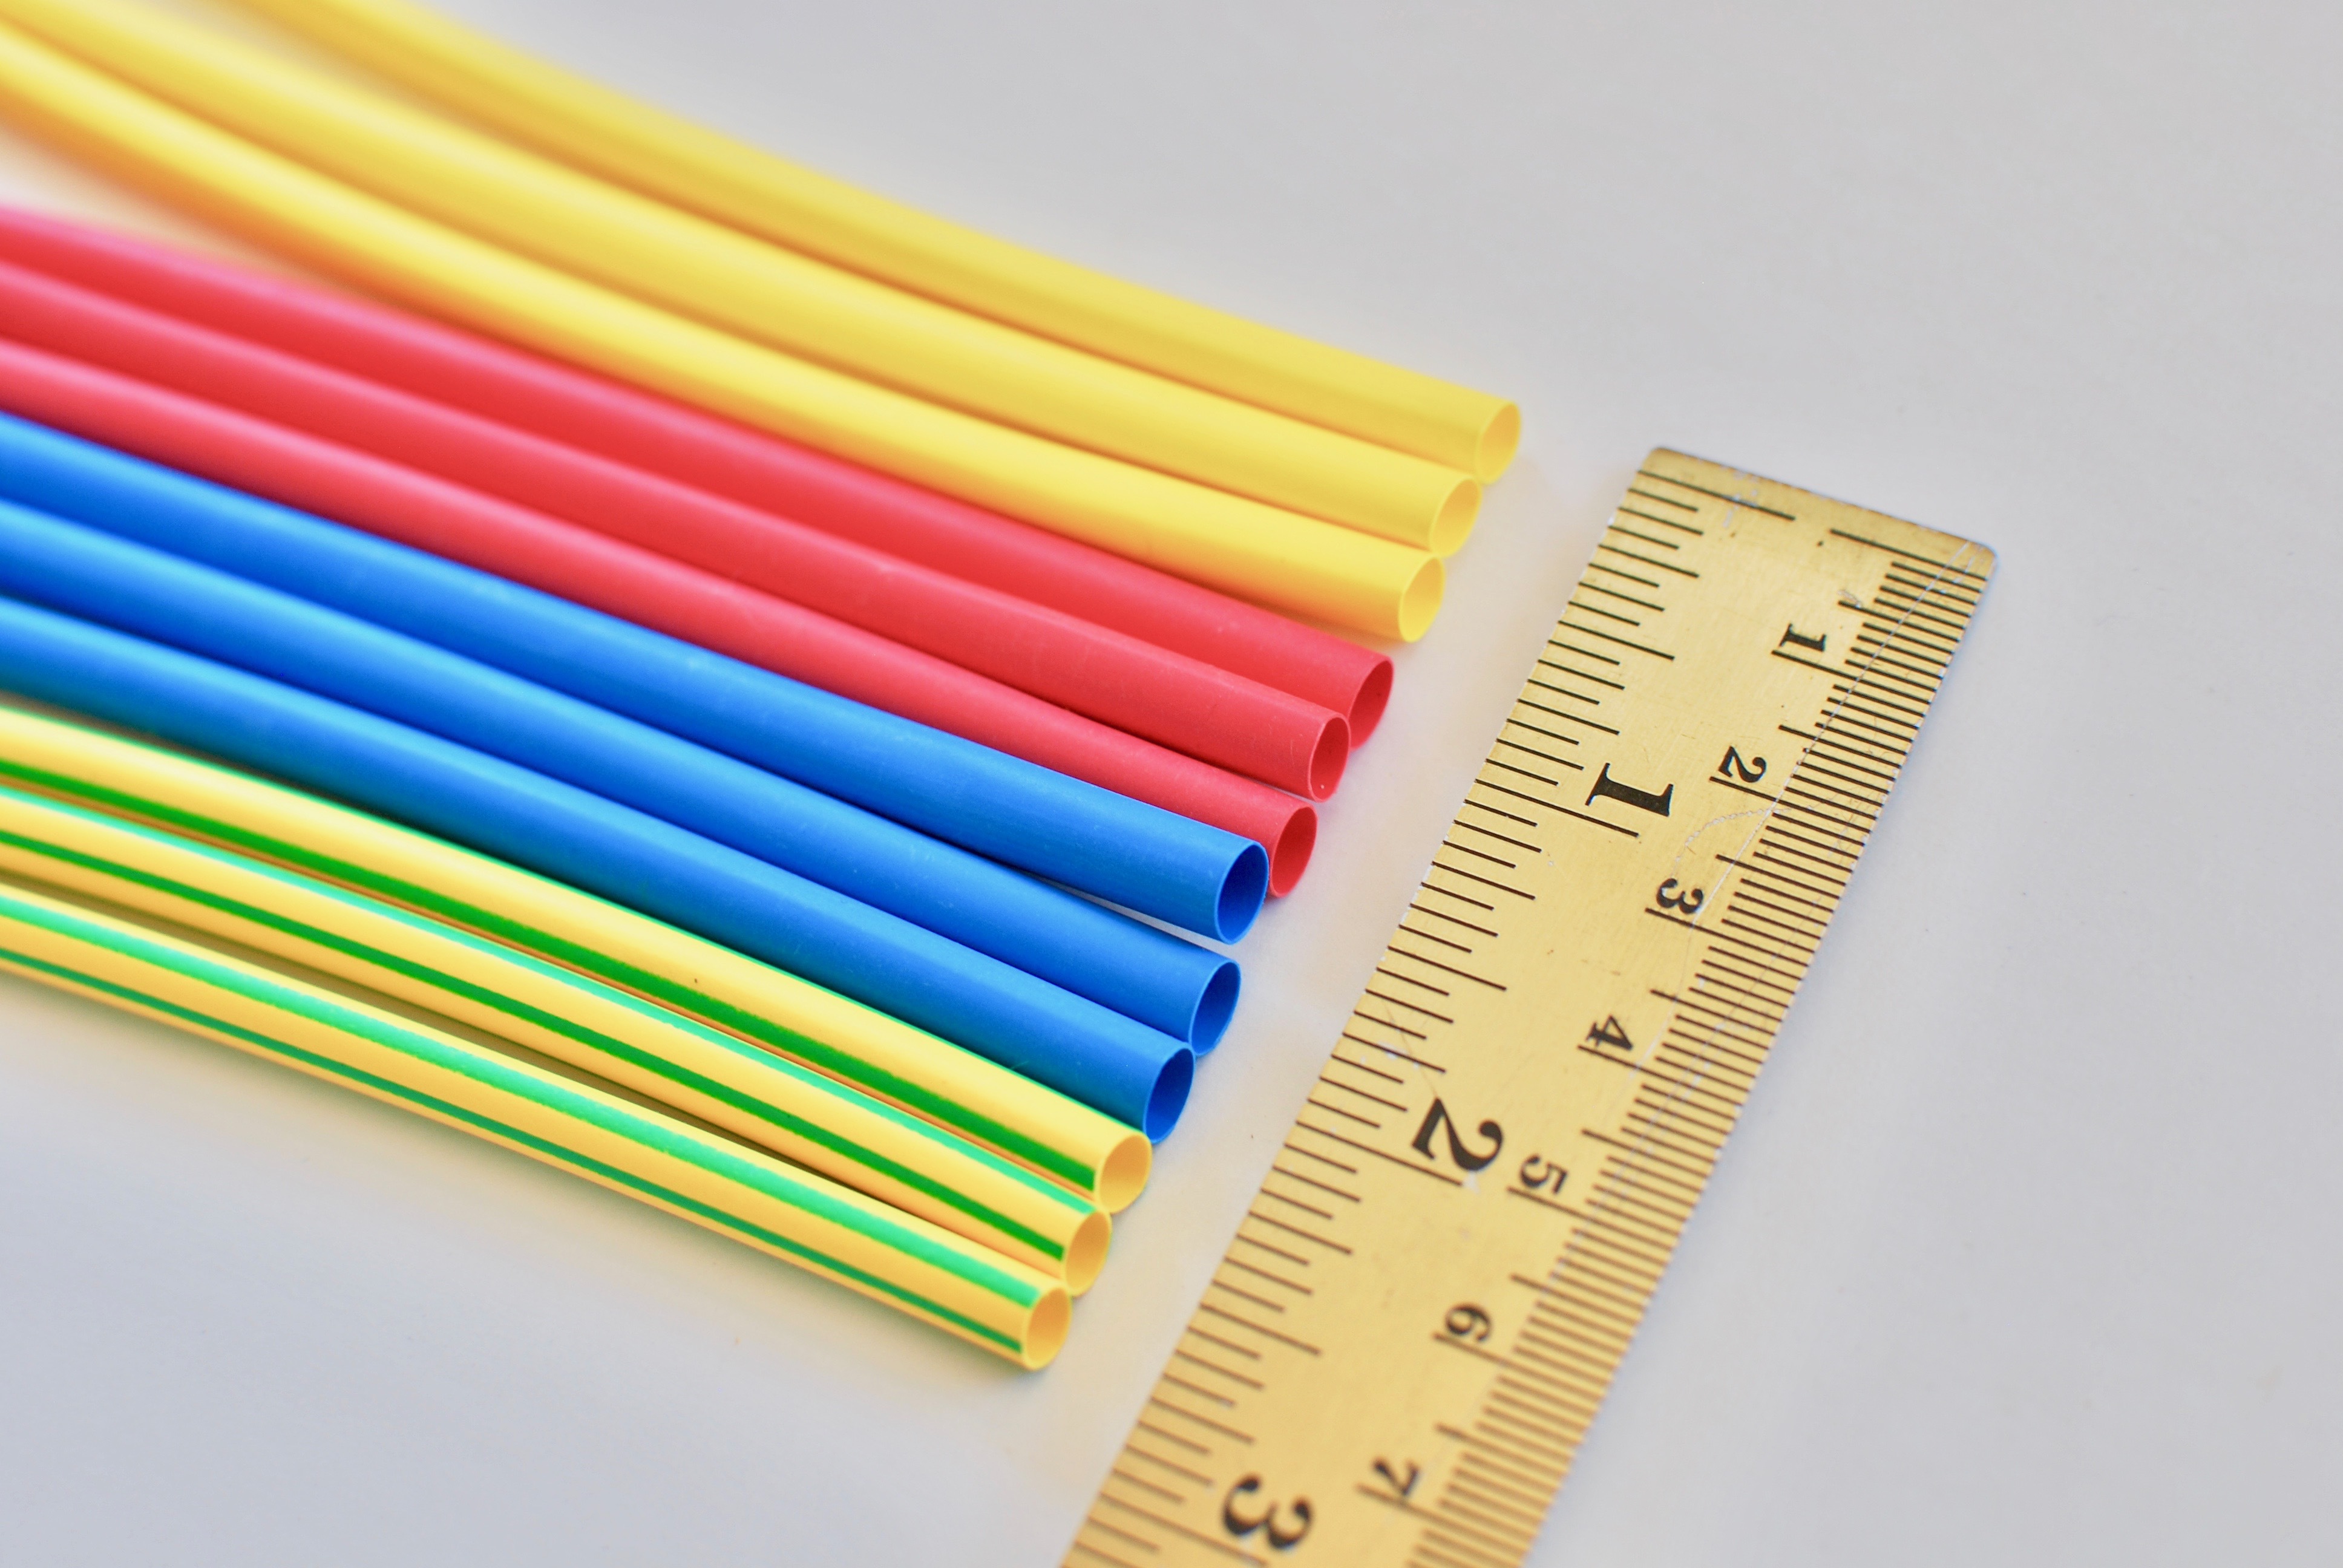 How To Buy Heat Shrink Tubing